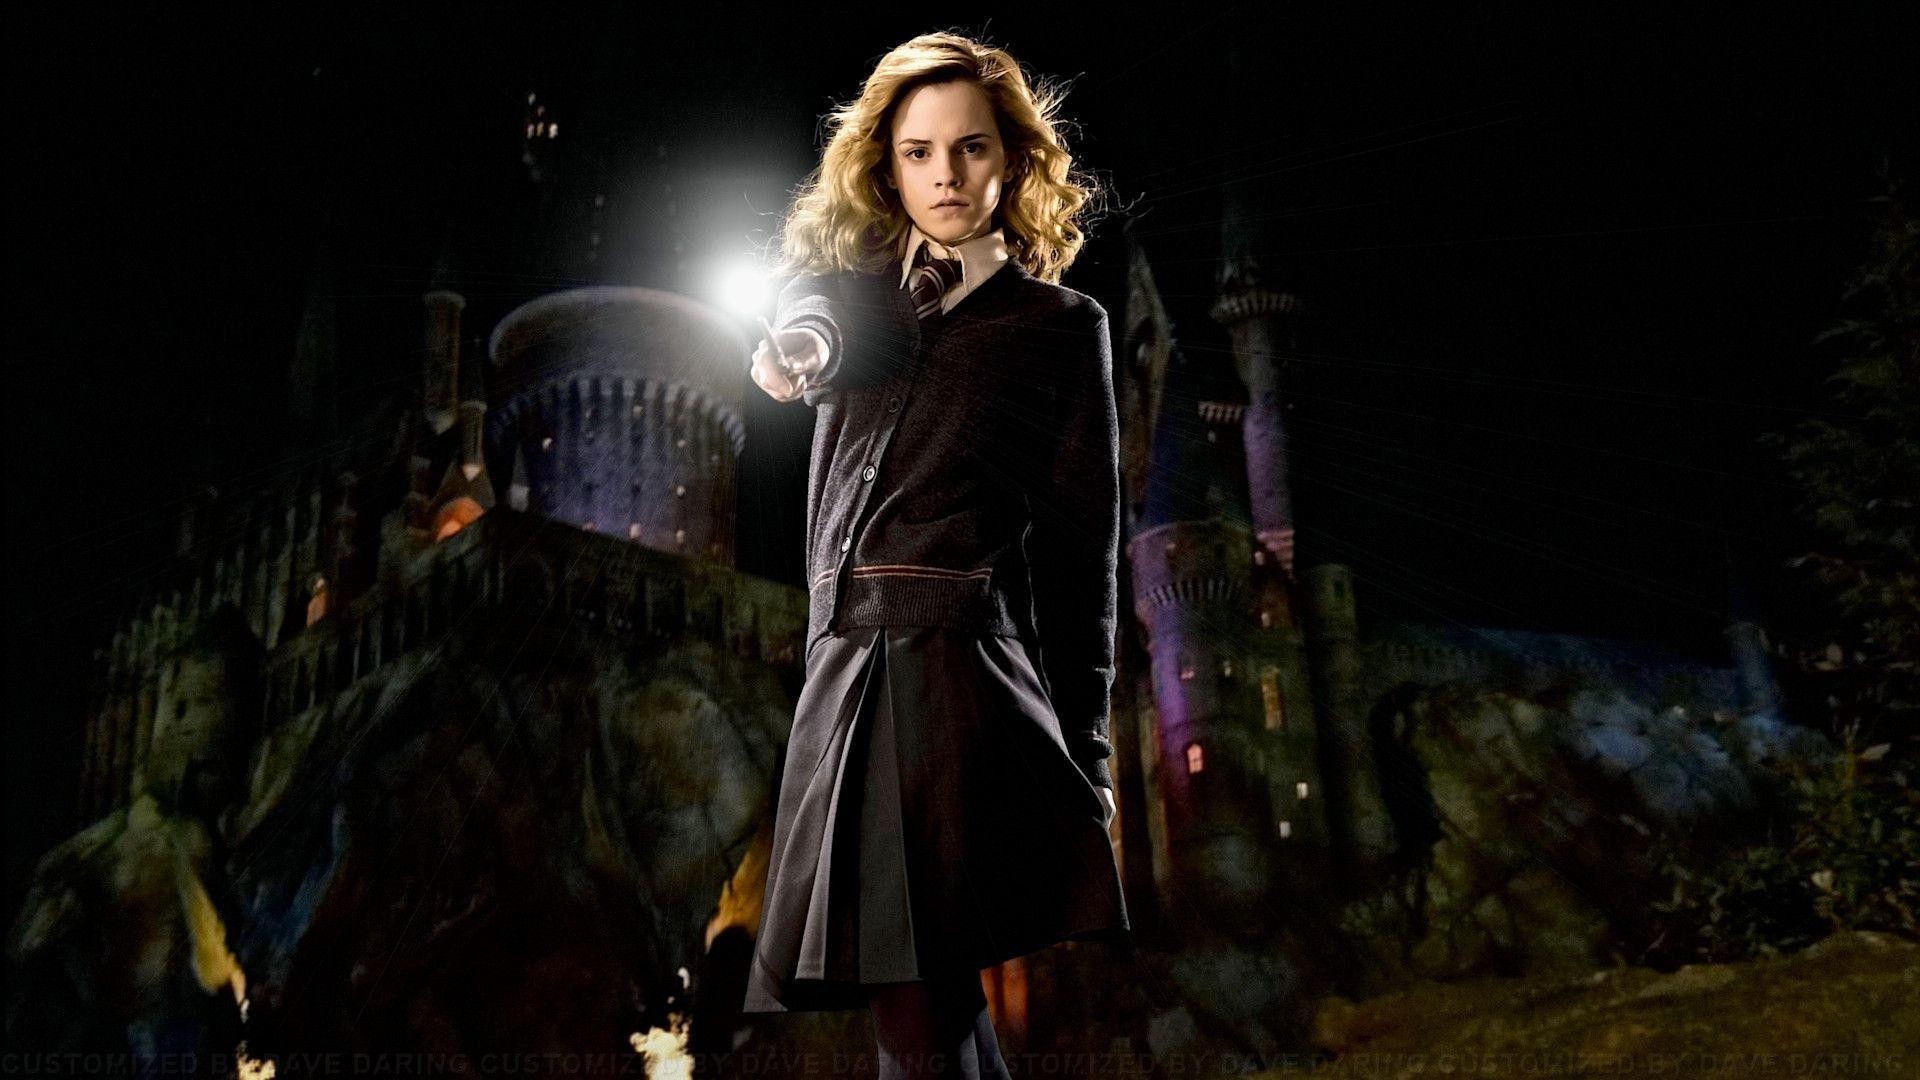 1920x1080 Hermione Granger and Harry Potter Crew HD Wide Wallpapers in jpg 1920Ã1080